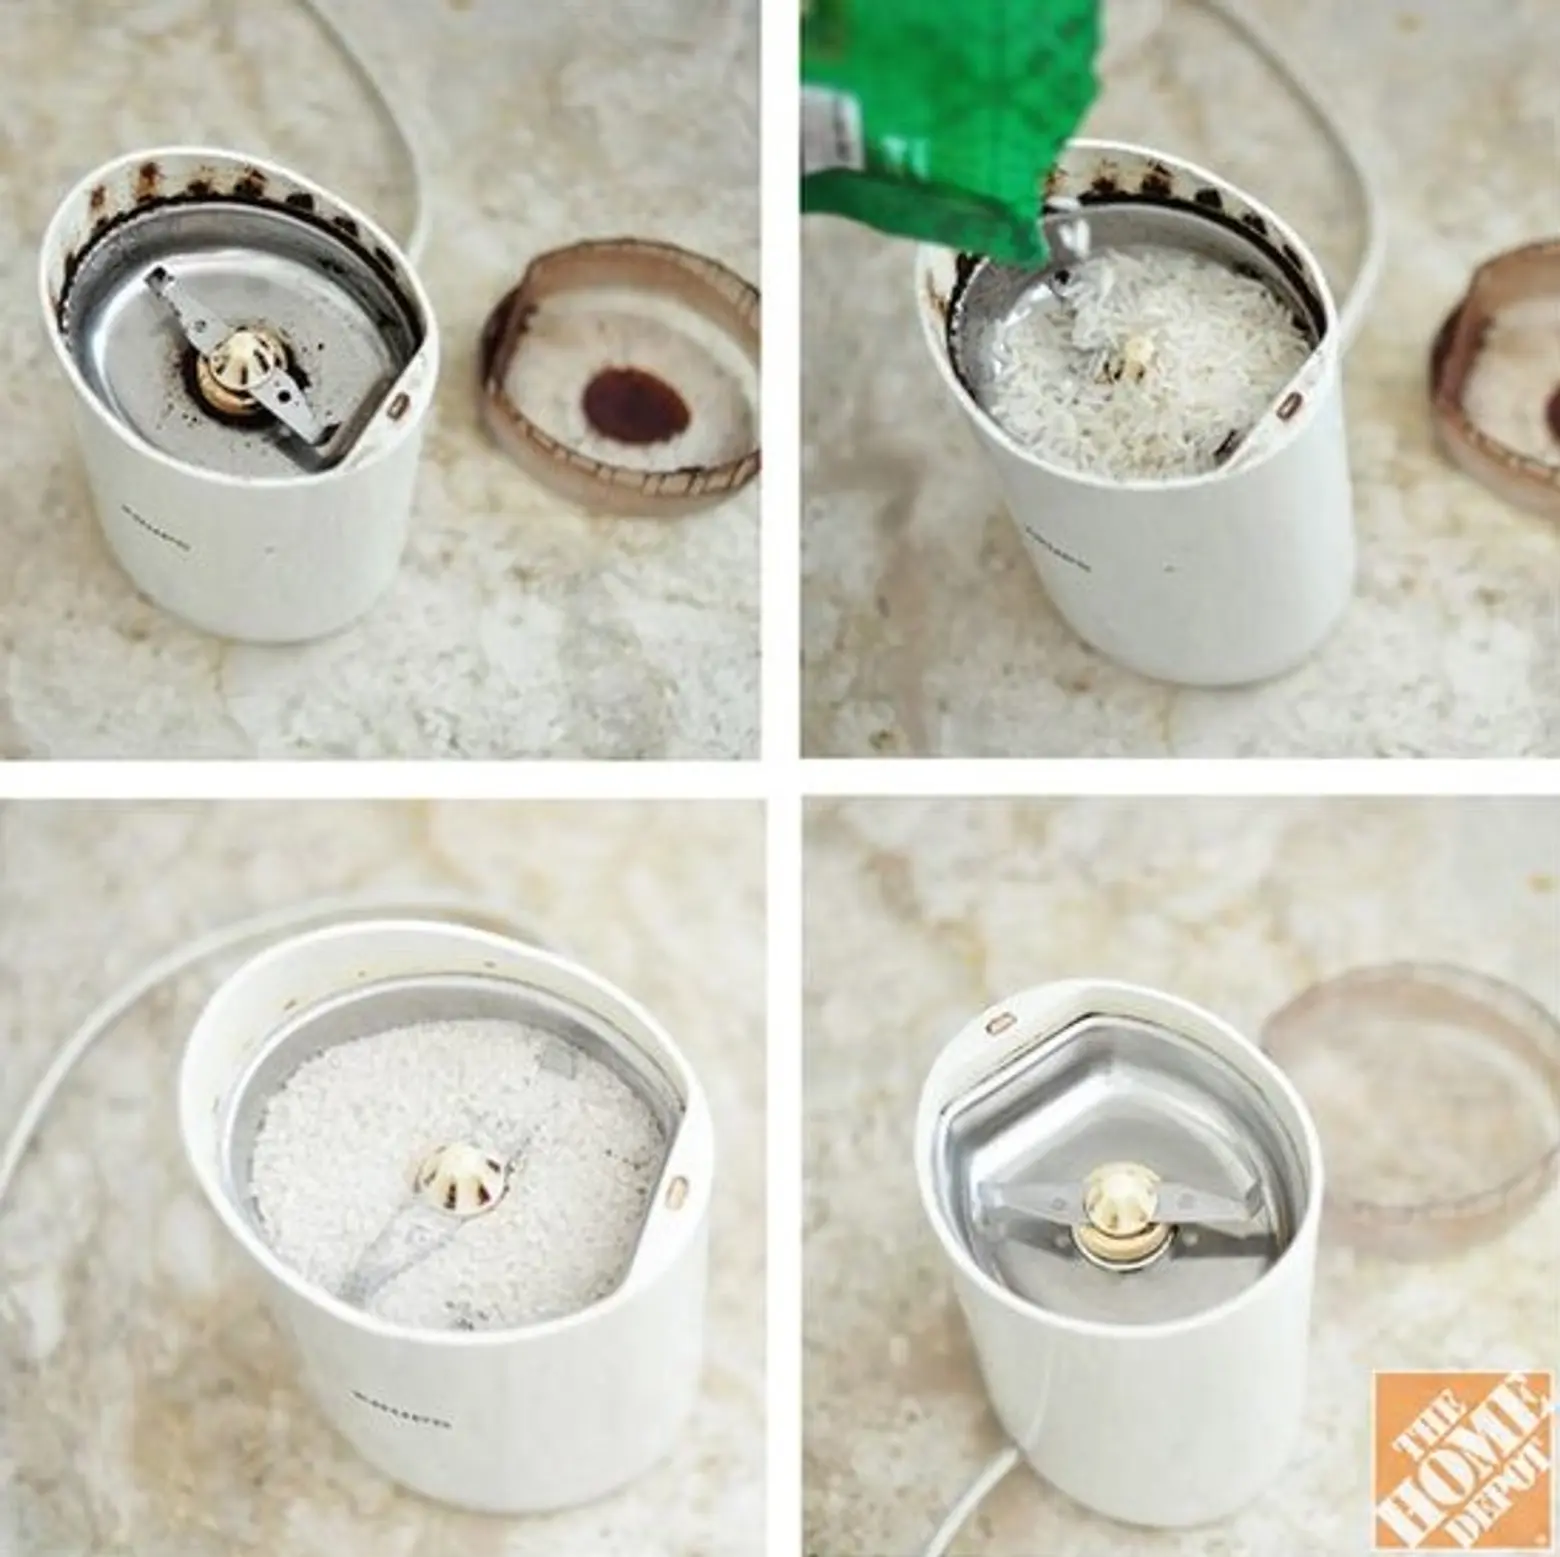 how to clean a coffee grinder